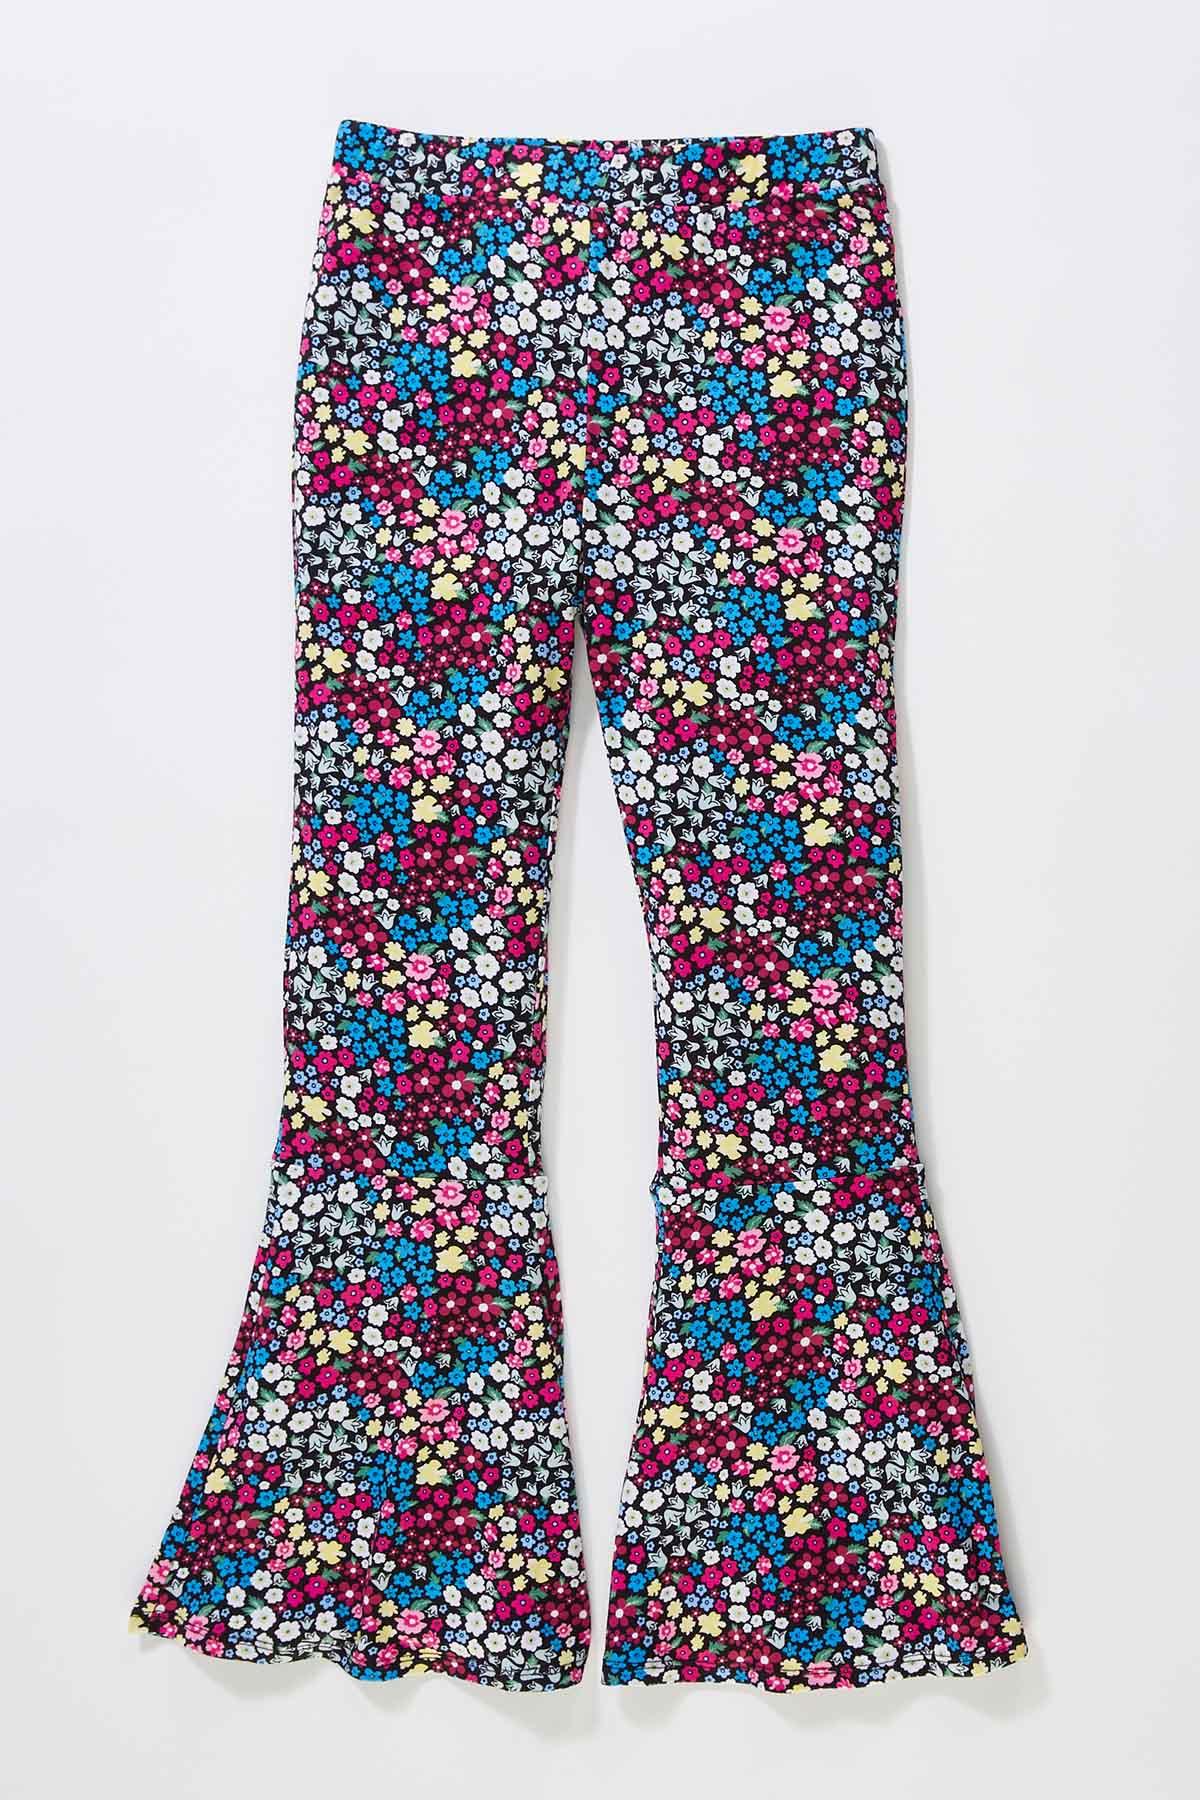 Cato Fashions  Cato Girls Floral Flare Pants